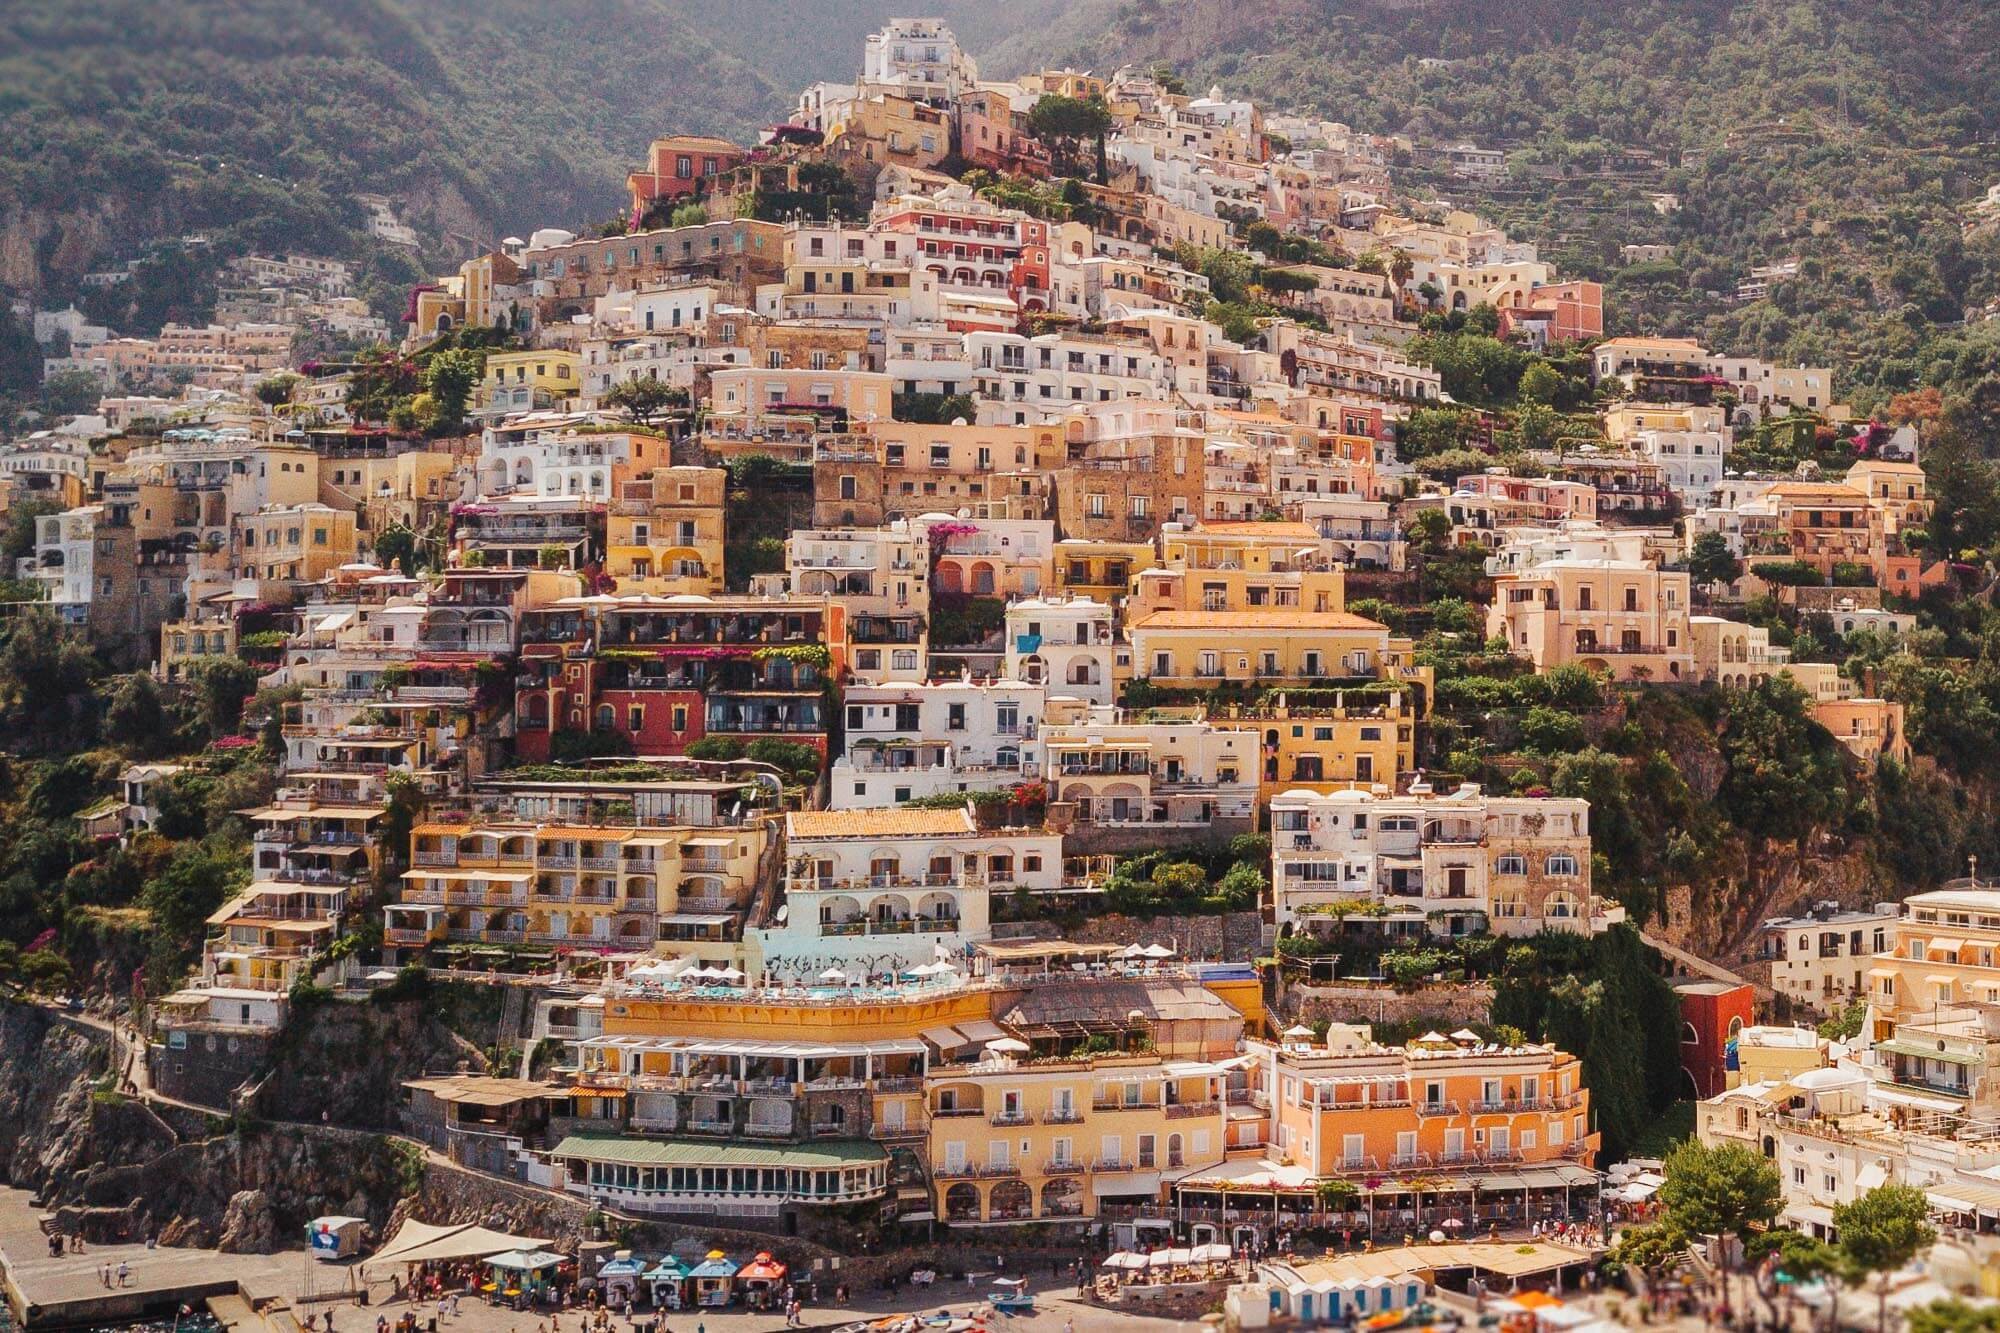 The easiest way to get from Florence to Positano is via train to Naples or Salerno. 